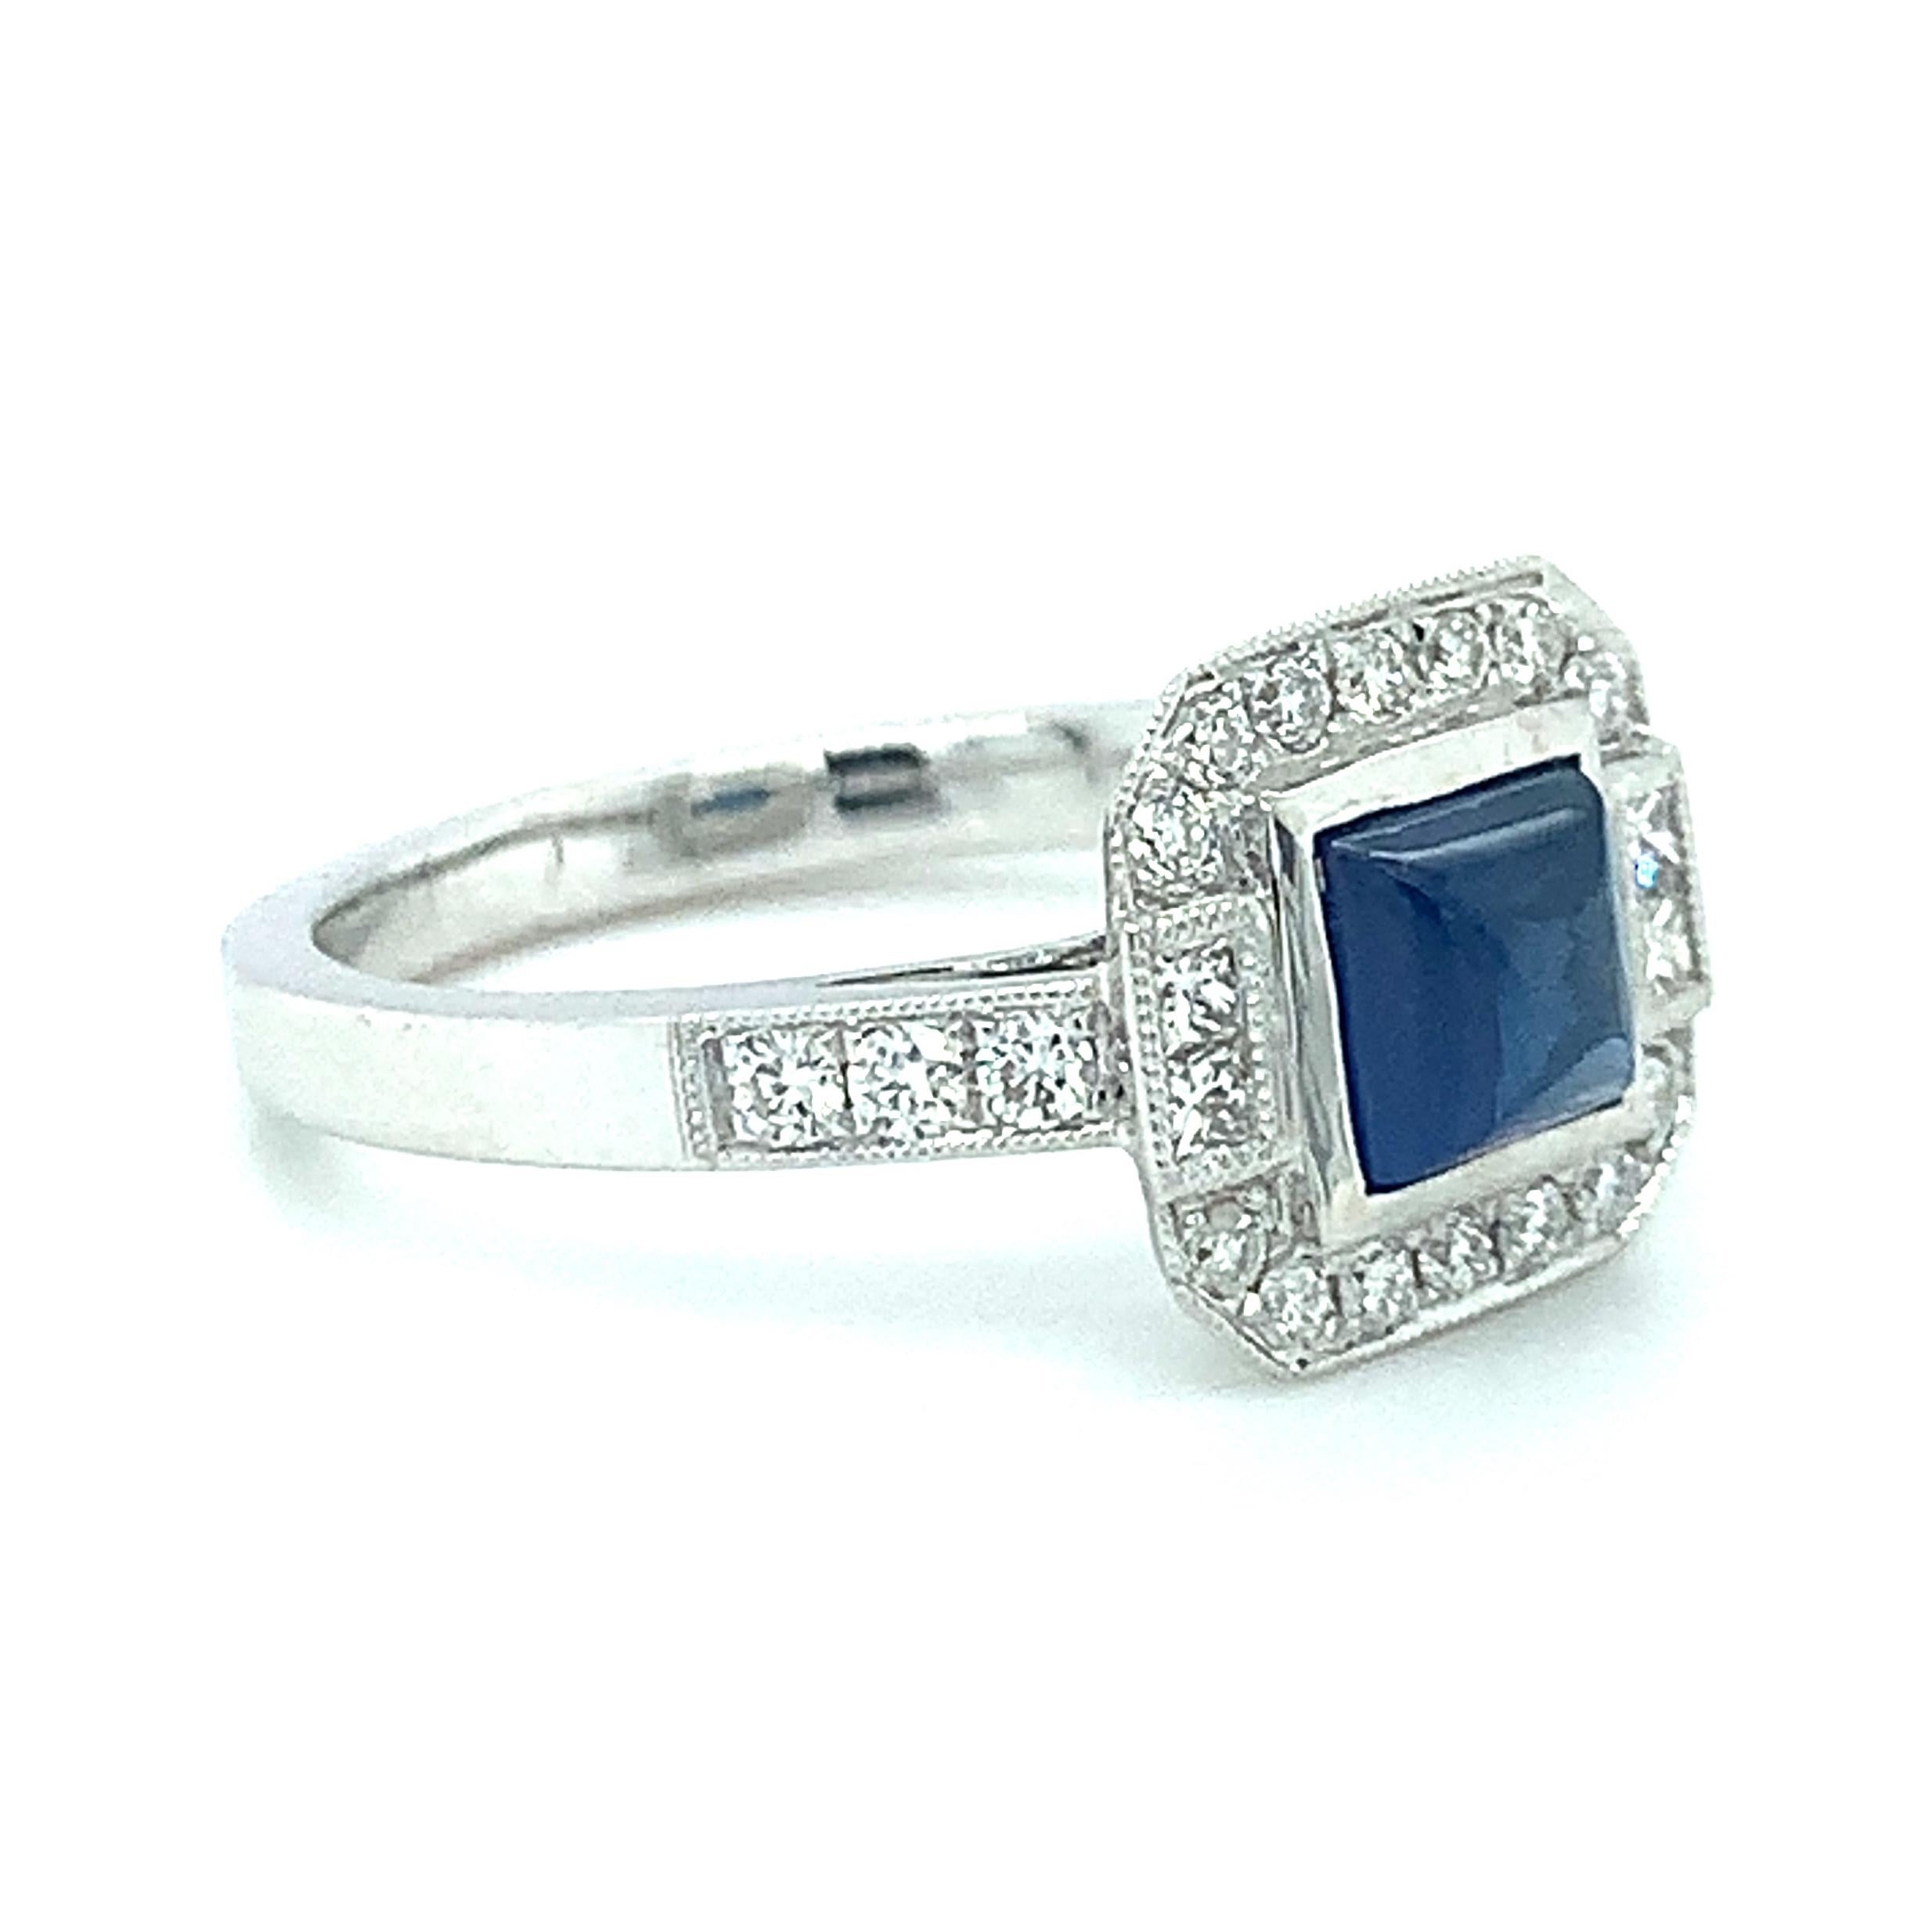 This pretty cocktail ring features an unusual center stone: a blue sapphire square cabochon! The sapphire has been bezel set in 18 white gold to highlight the gem's beautiful outline, with a row of scintillating diamonds pave set around it in a